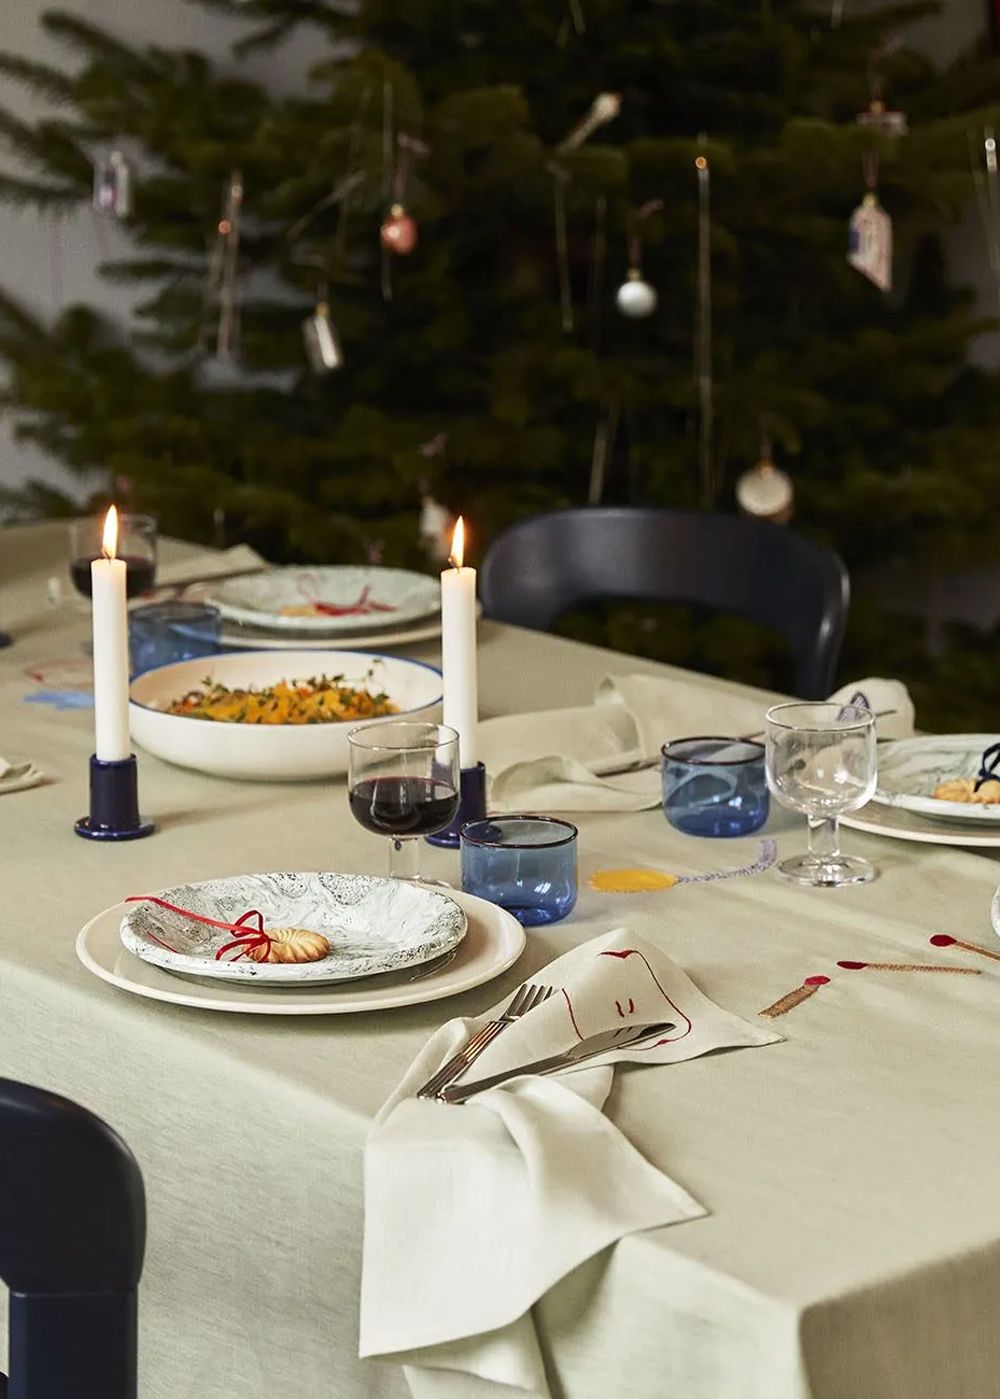 Mix & Match | Inspiration for the annual christmas table